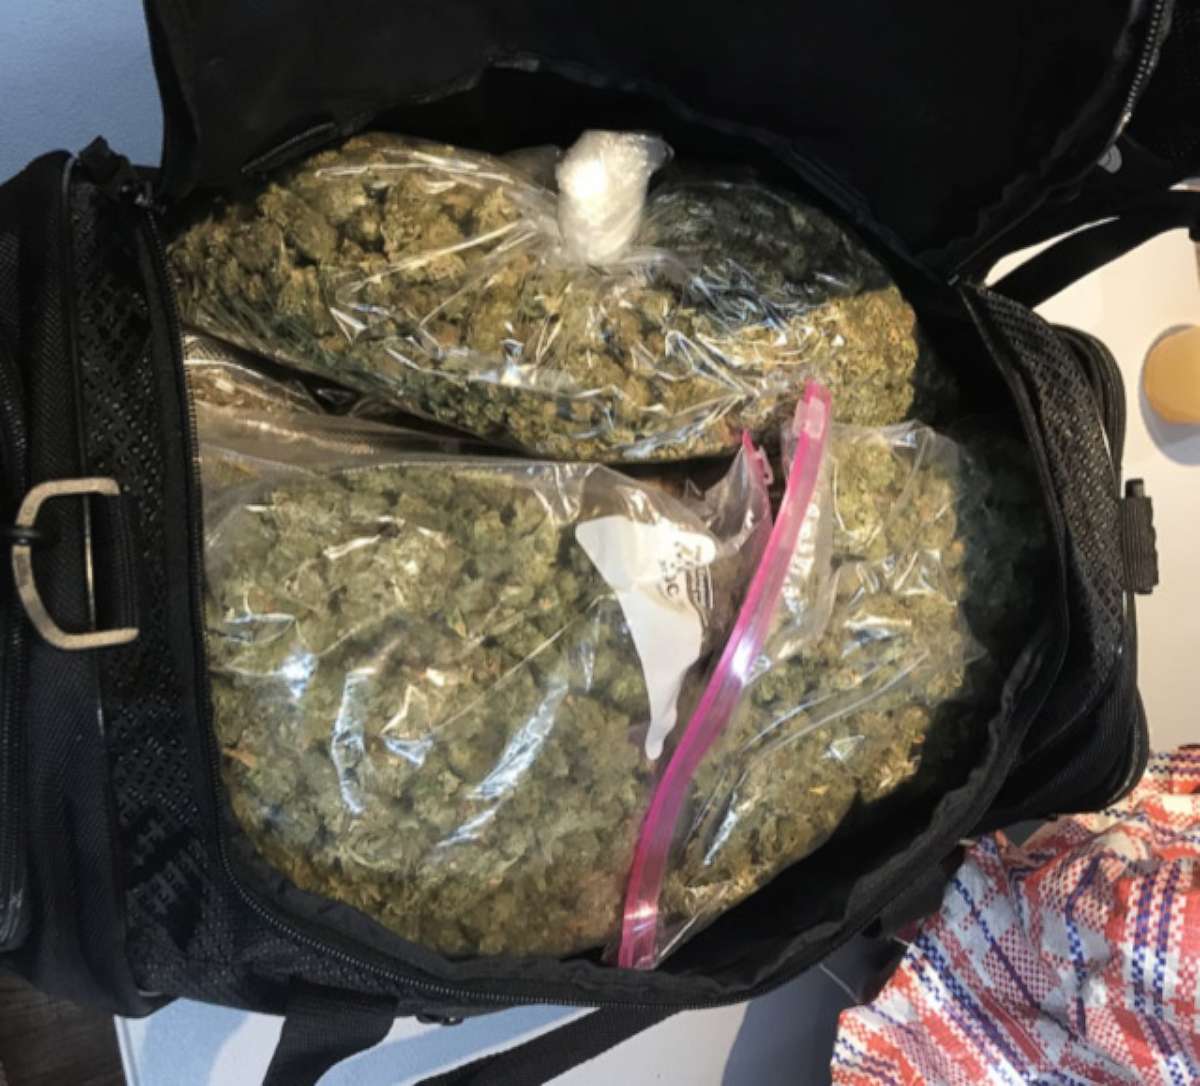 PHOTO: New York City police broke up a party celebrating the marijuana holiday of 4/20 and recovered weed, pills, edibles, police said.